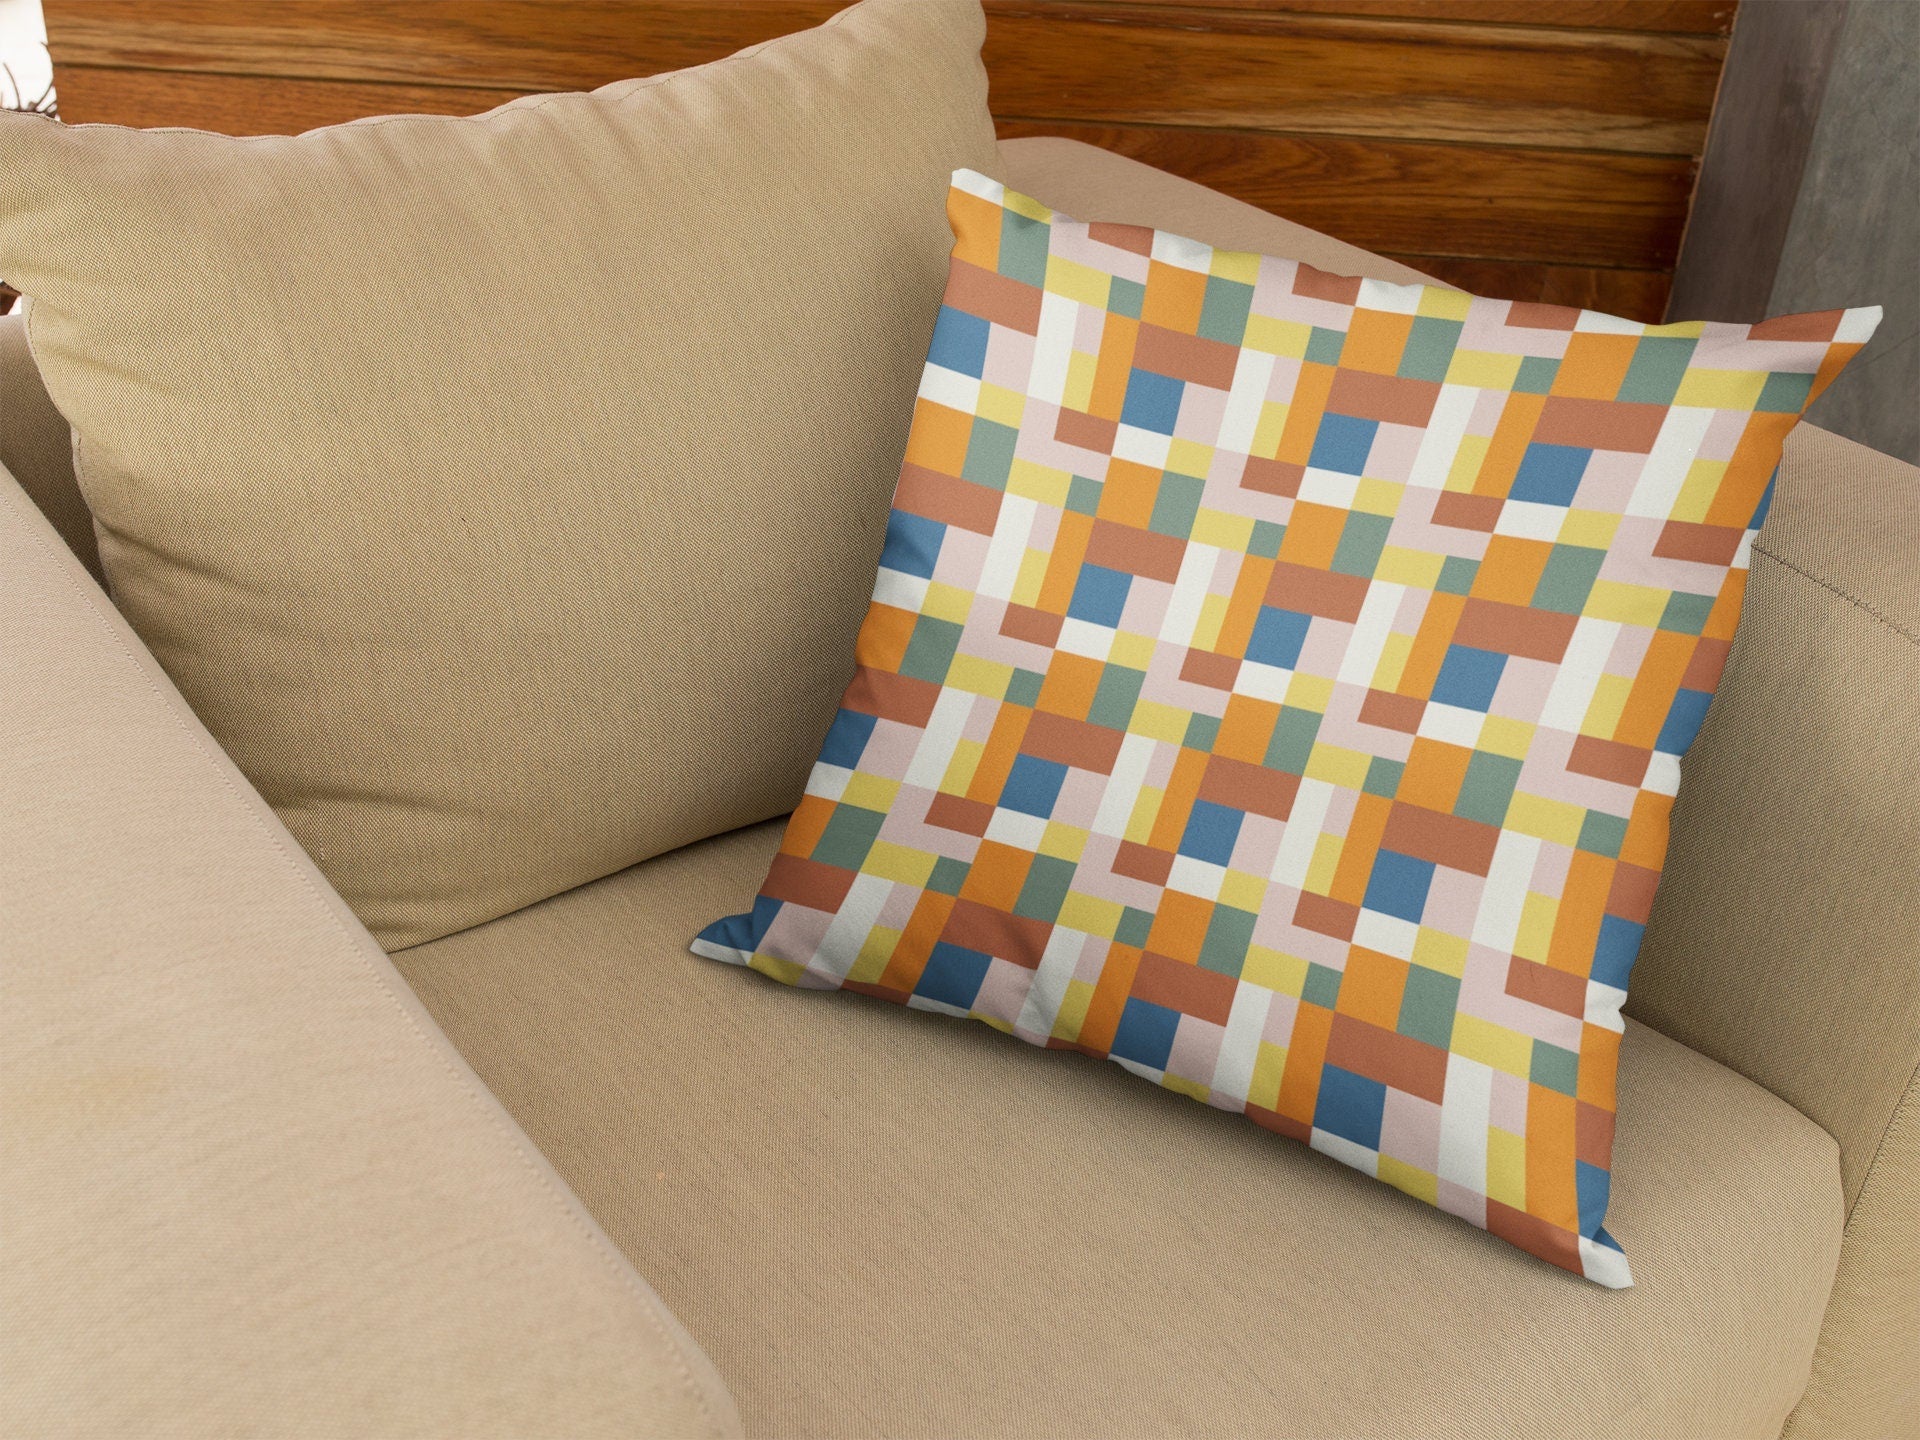 Colorful Outdoor Pillow - Geometric Orange, Blue, Pink and Green - Throw Pillows